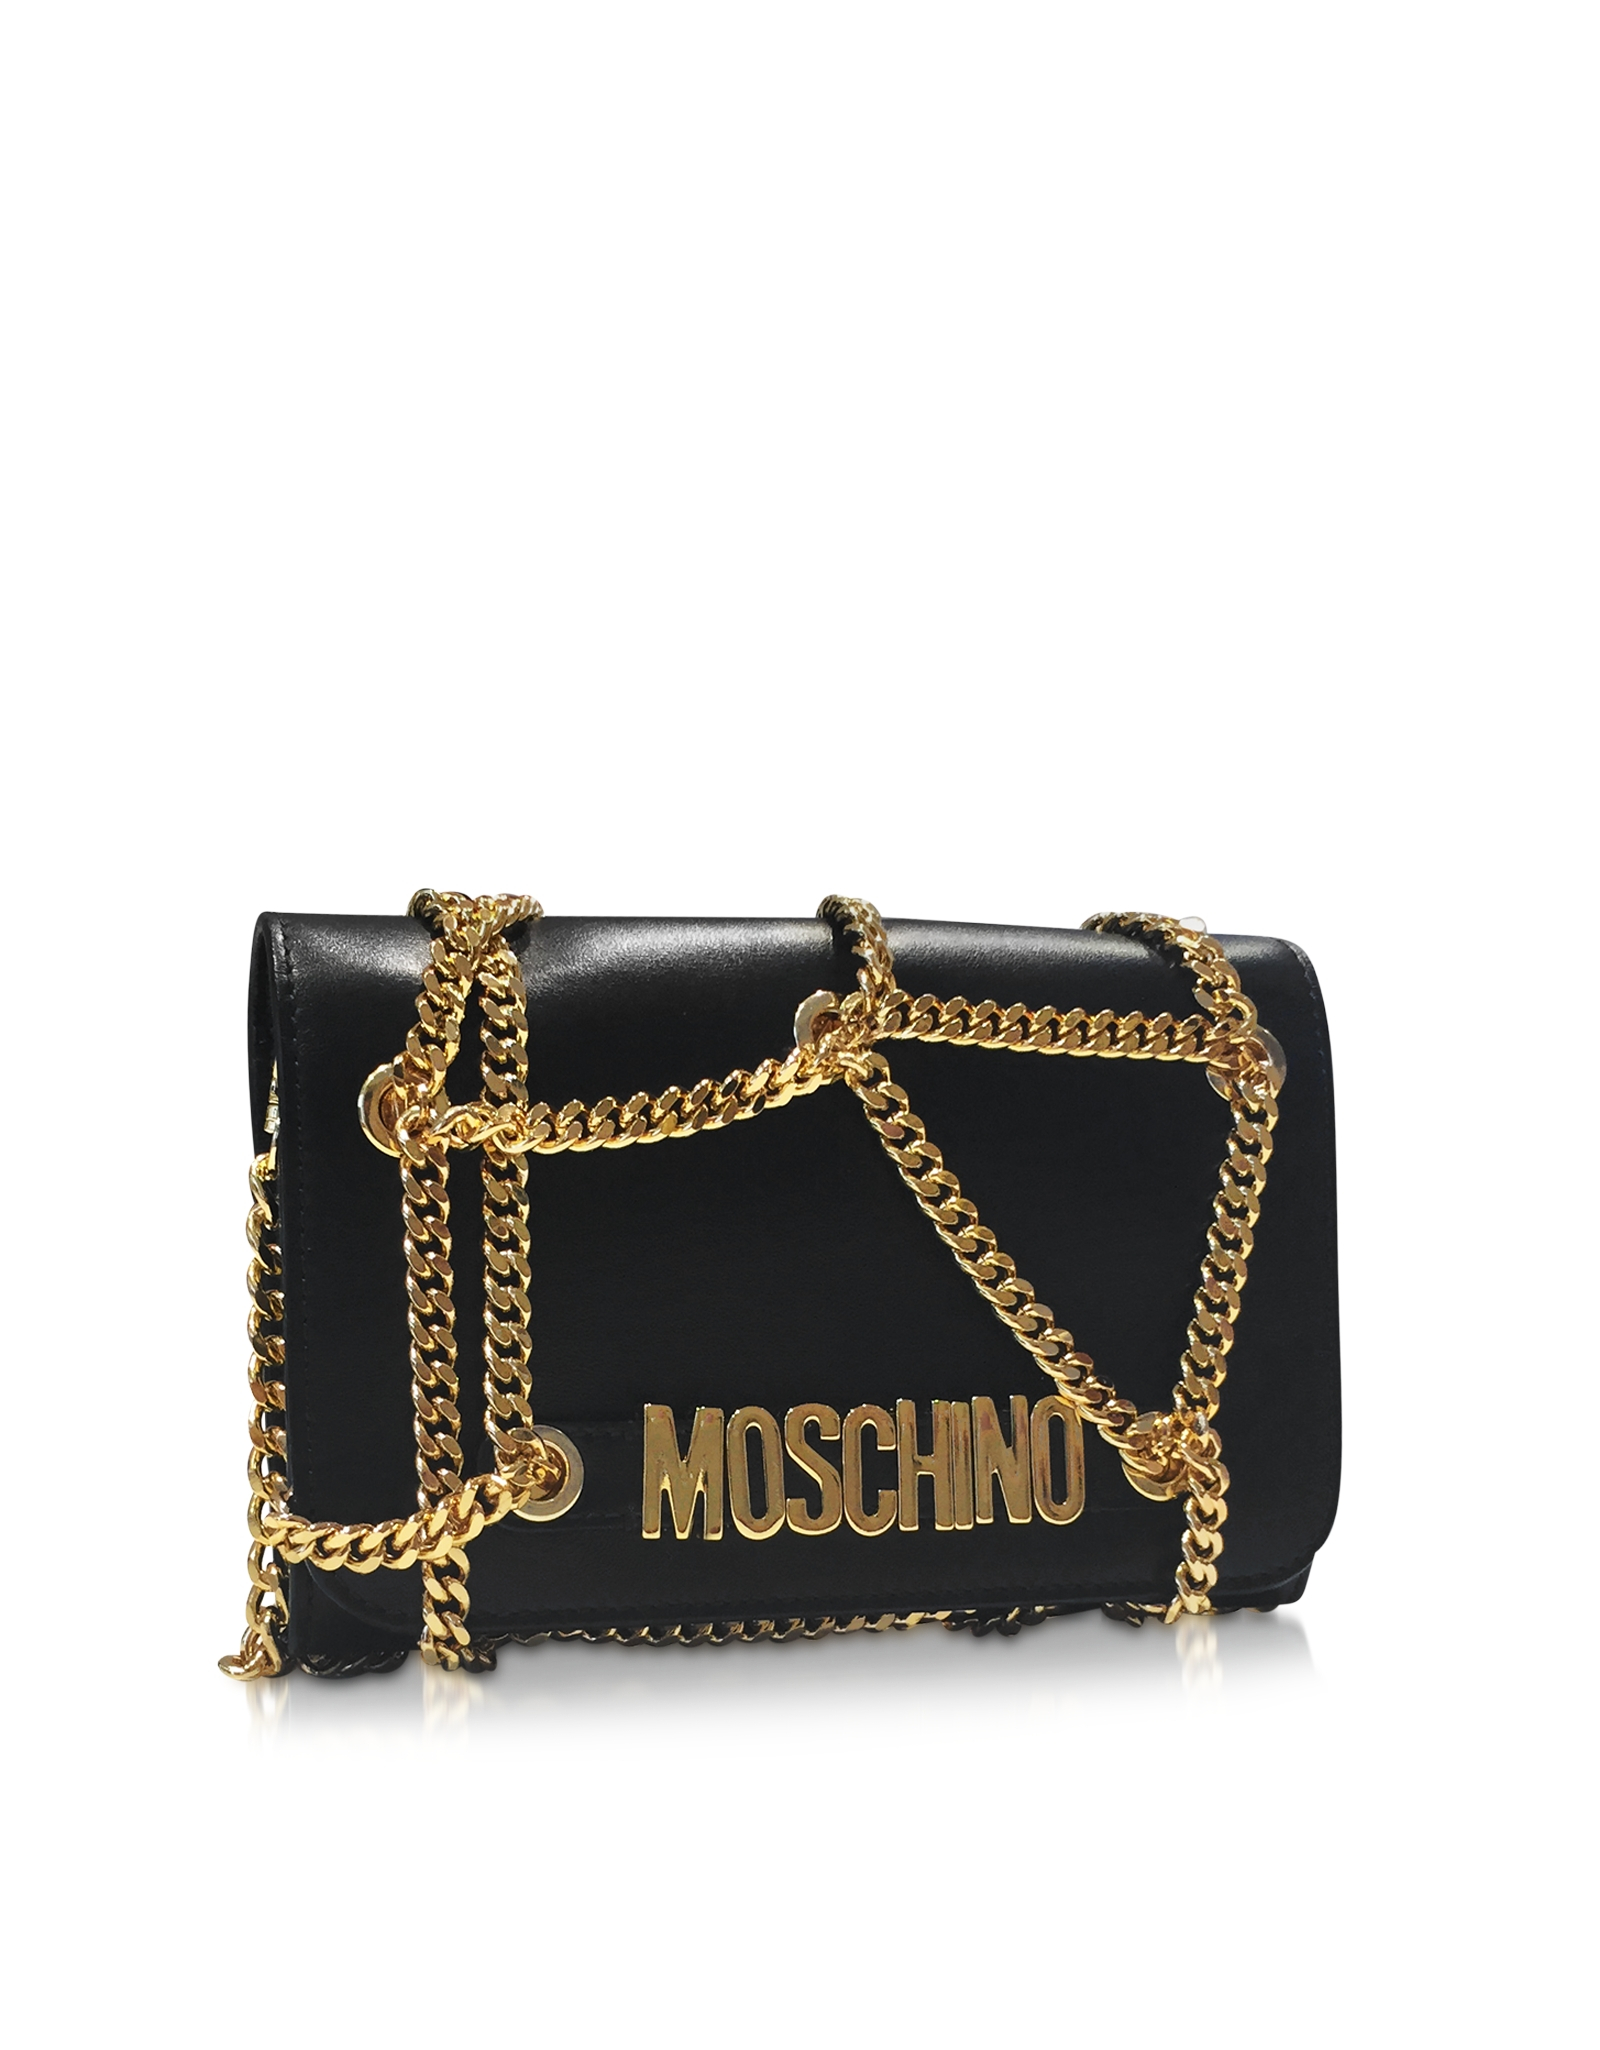 Lyst - Moschino Black Leather Wallet/clutch in Black